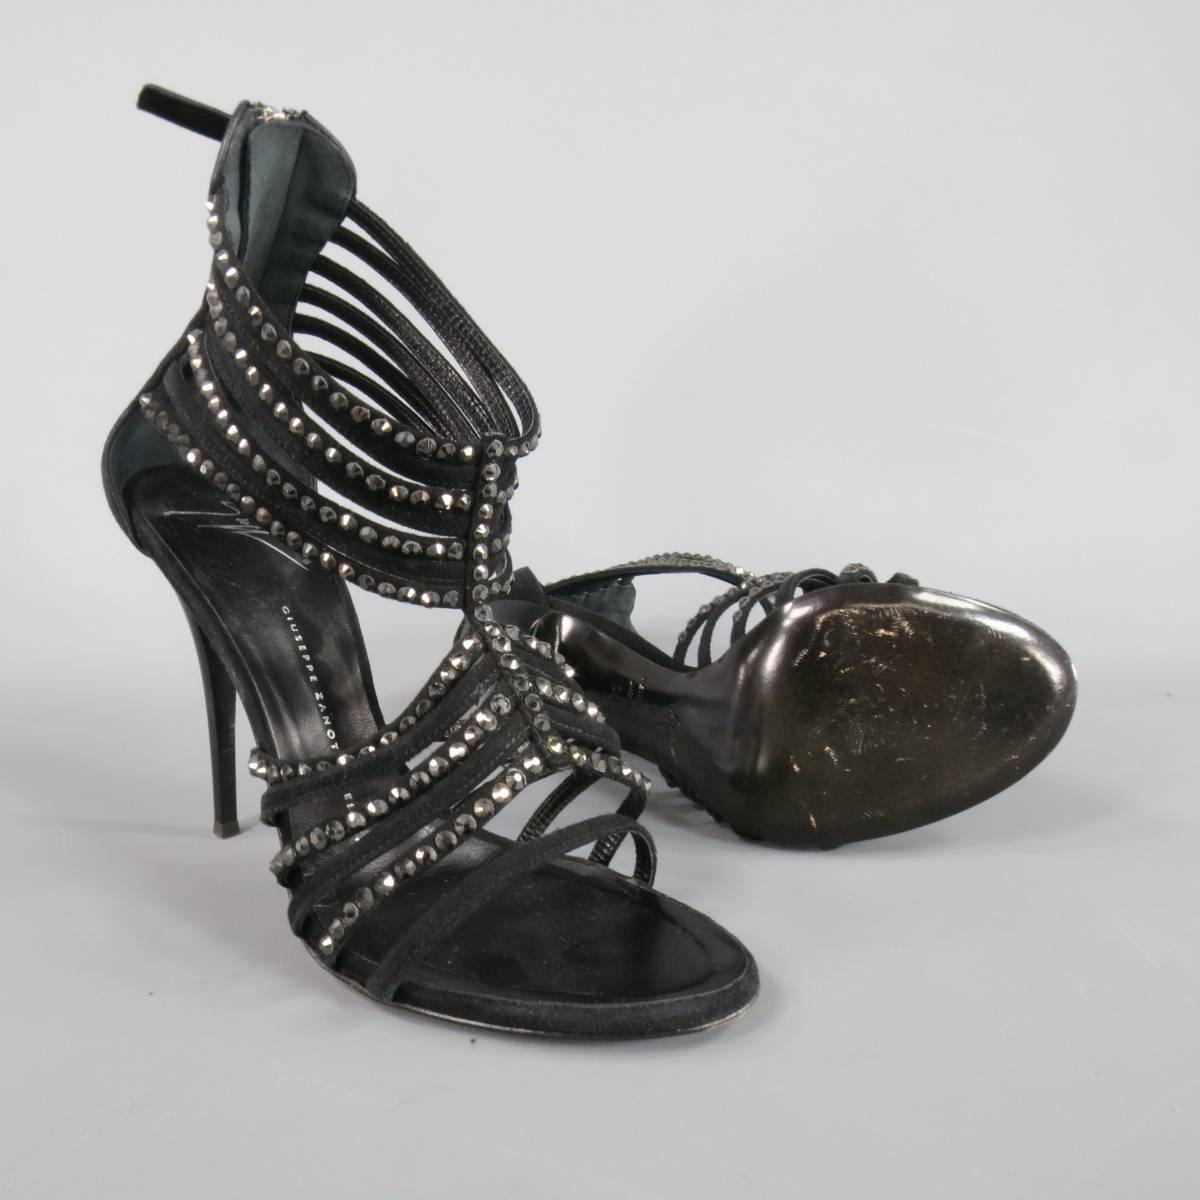 These fun GIUSEPPE ZANOTTI sandals come in black suede and feature an open toe and thick T strap gladiator straps made of skinny crystal studded straps. Made in Italy.
 
Excellent Pre-Owned Condition.
Marked: IT 38.5
 
Heel: 4.5 in.